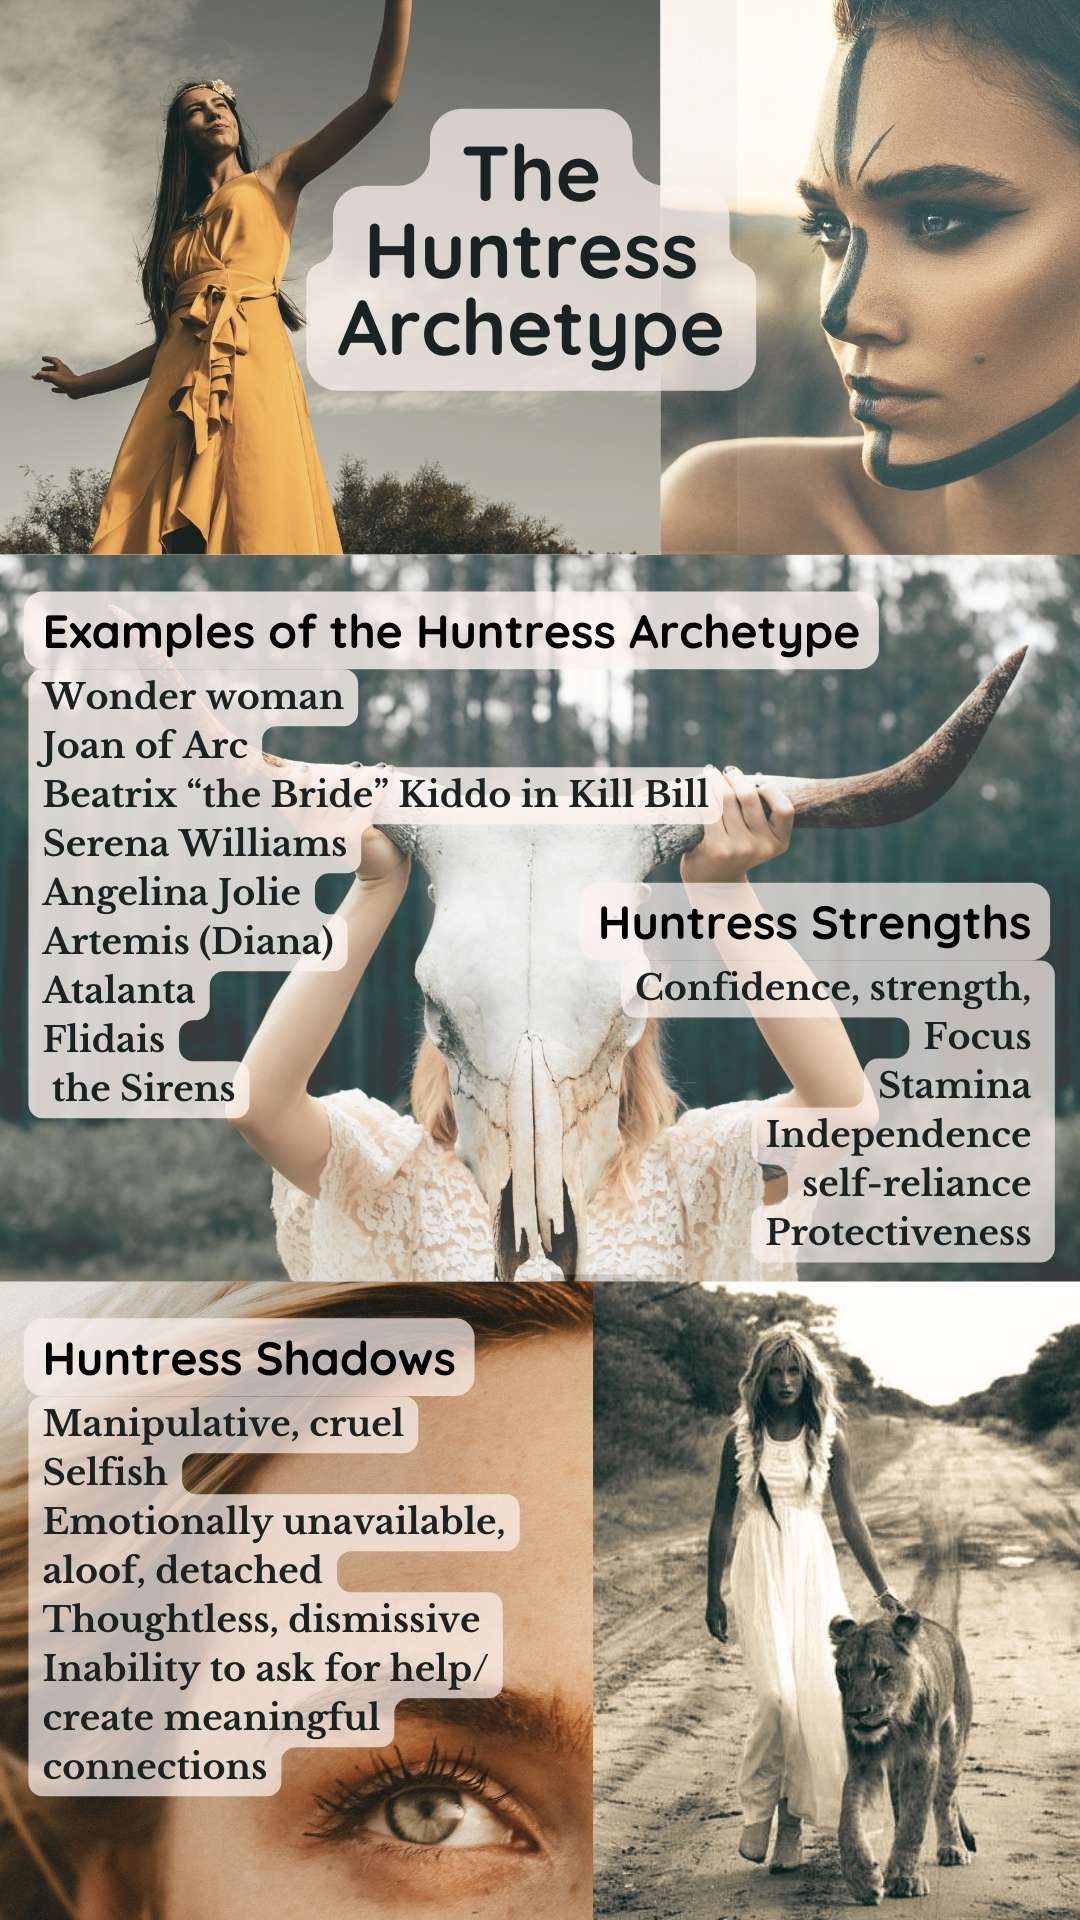 Guide to the Huntress Archetype with examples, strengths and shadow side